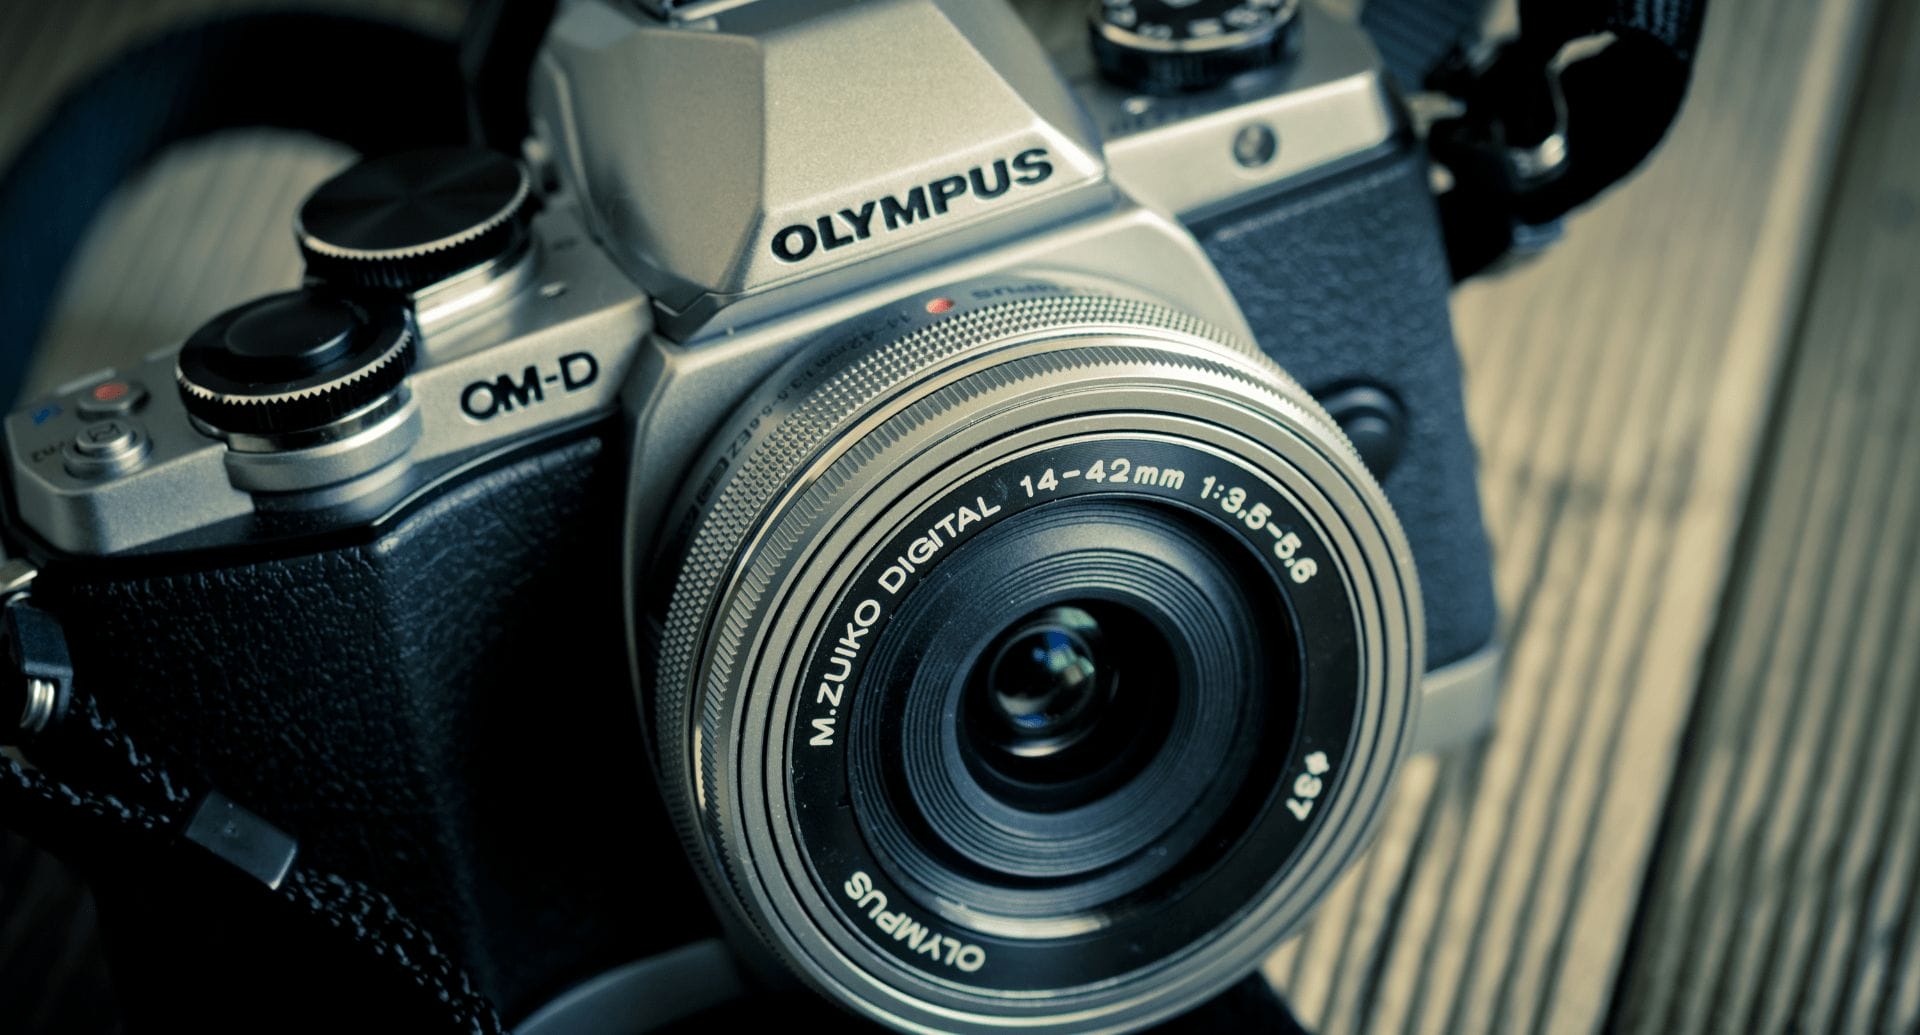 The Olympus omd em5 mark ii, which I consider the best mirrorless camera for traveling